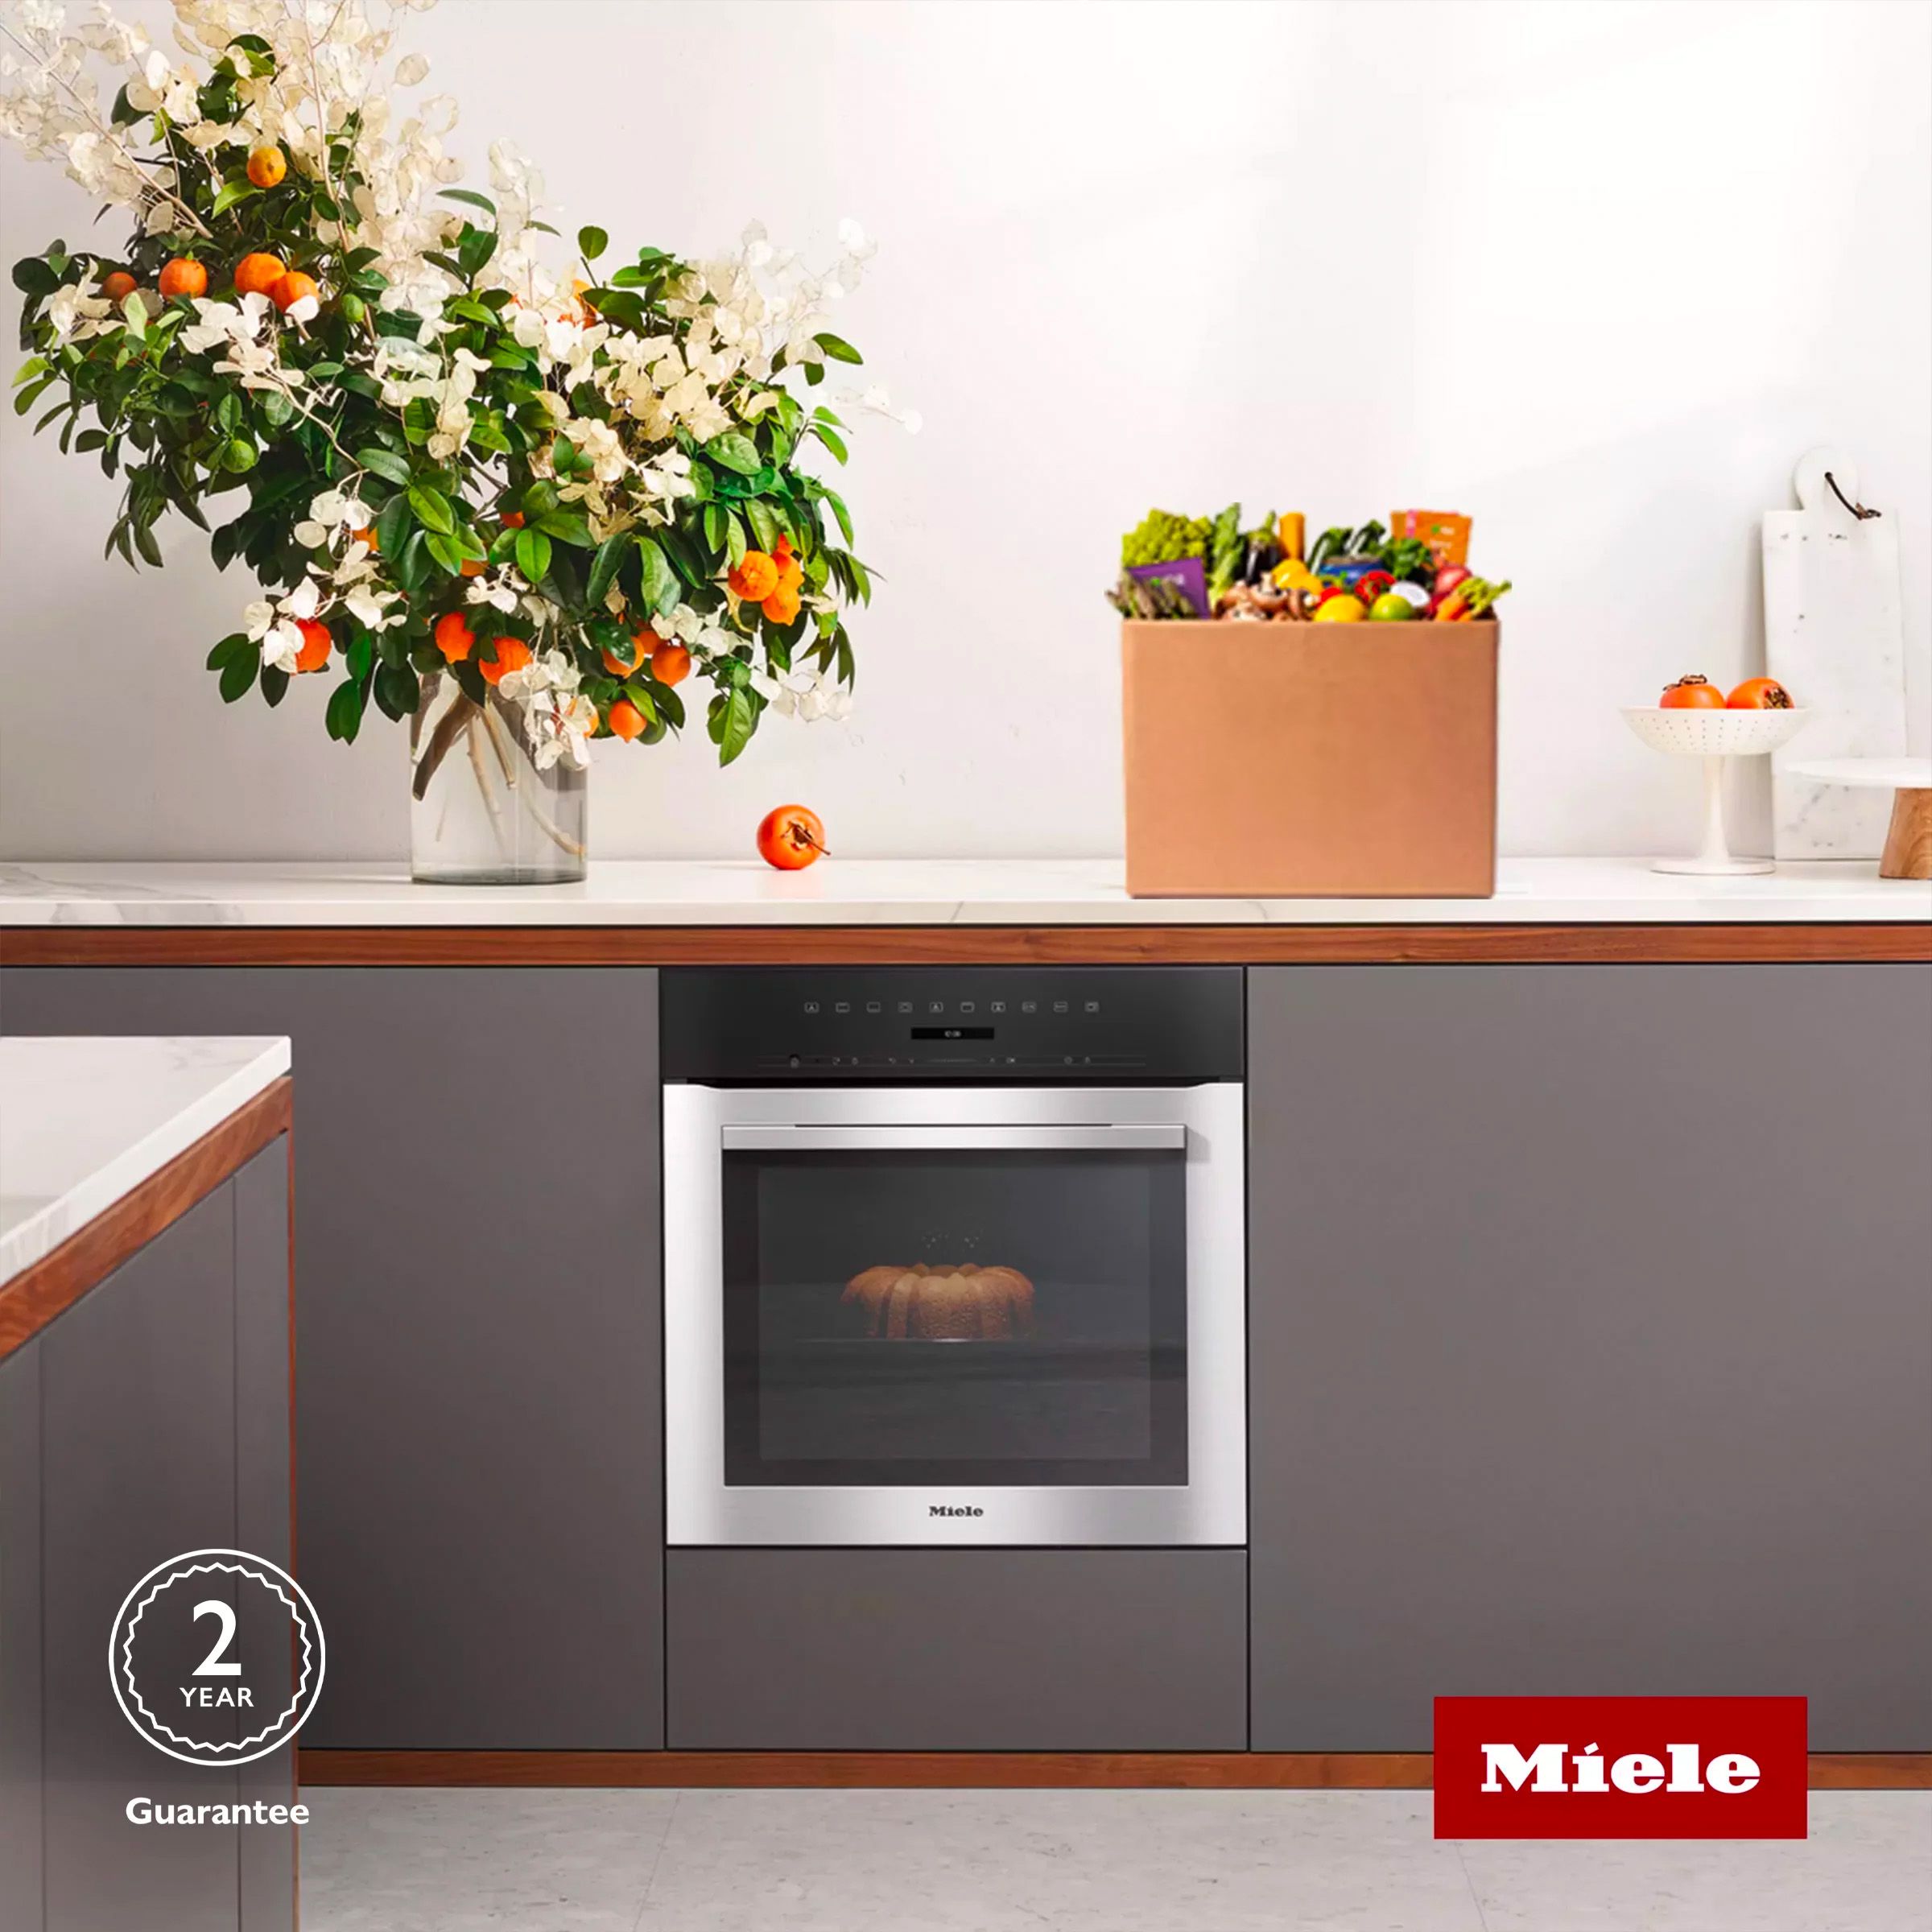 Consistent performance, outstanding results with Miele